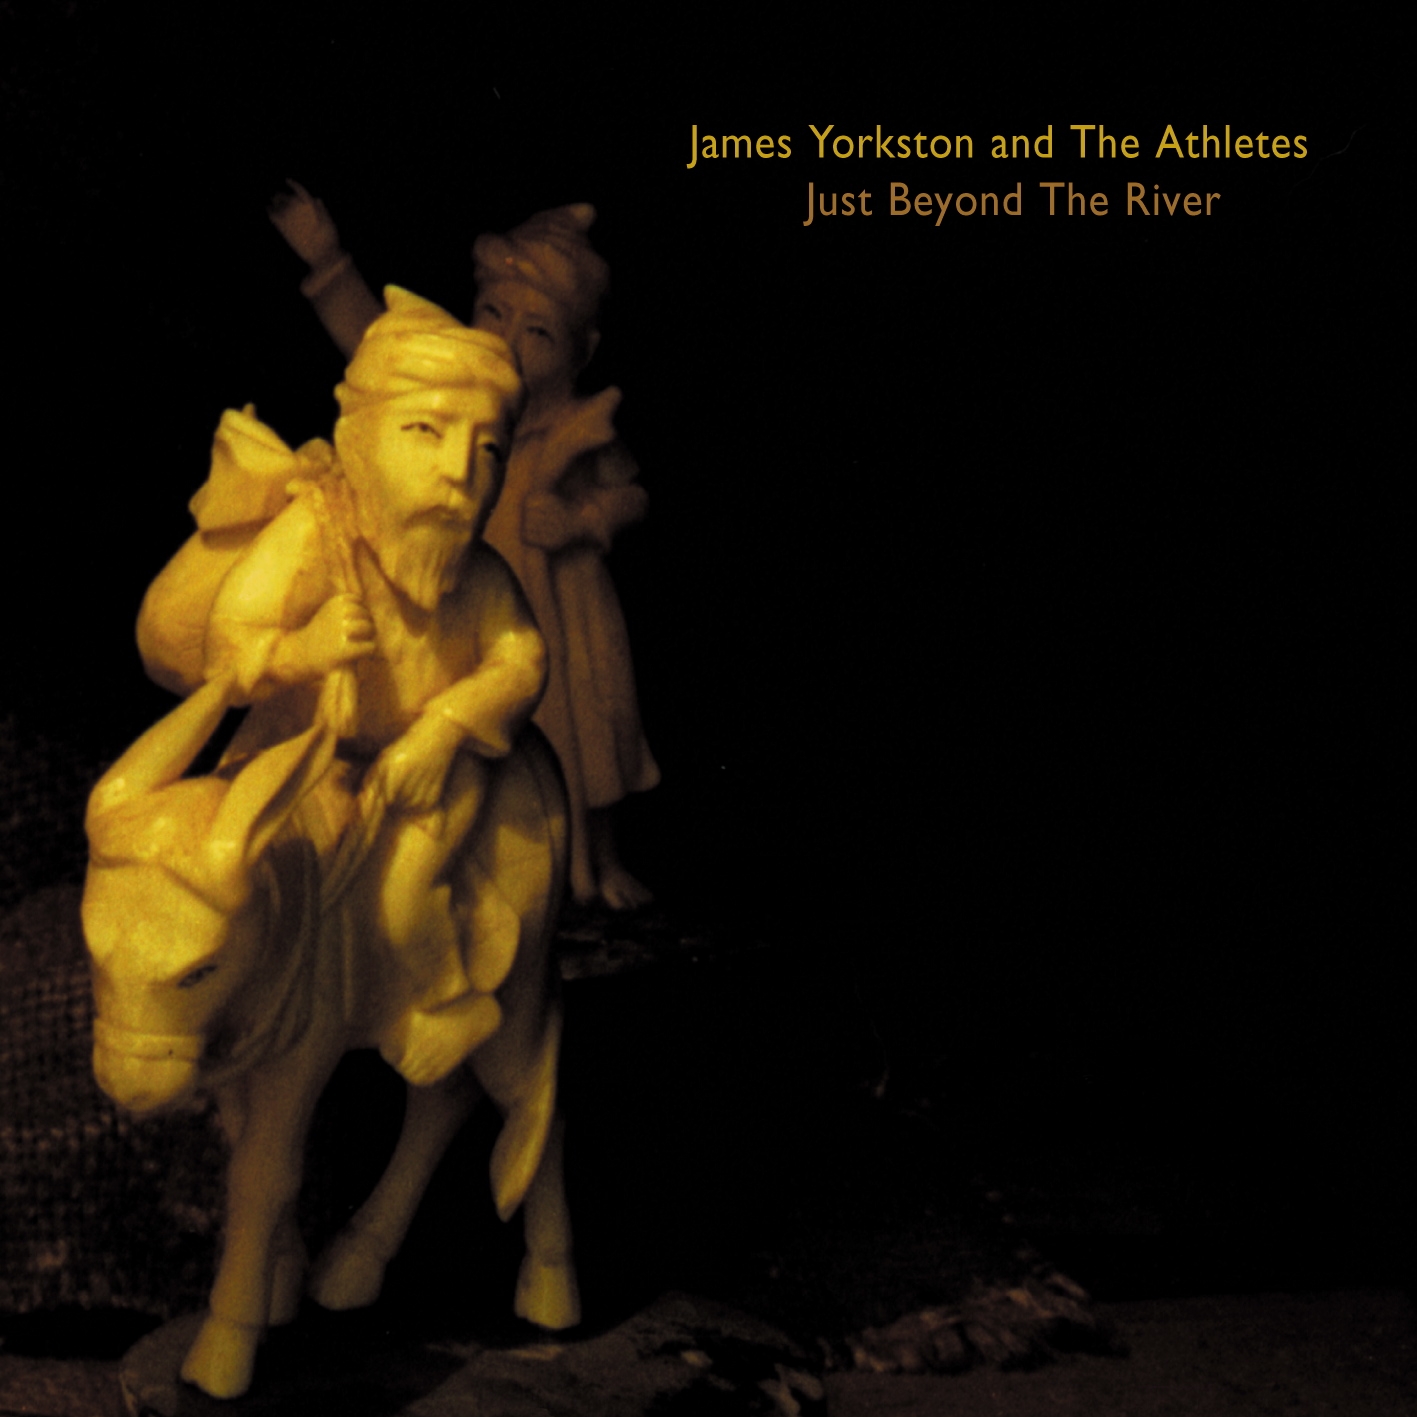 James Yorkston & The Athletes - Just Beyond The River